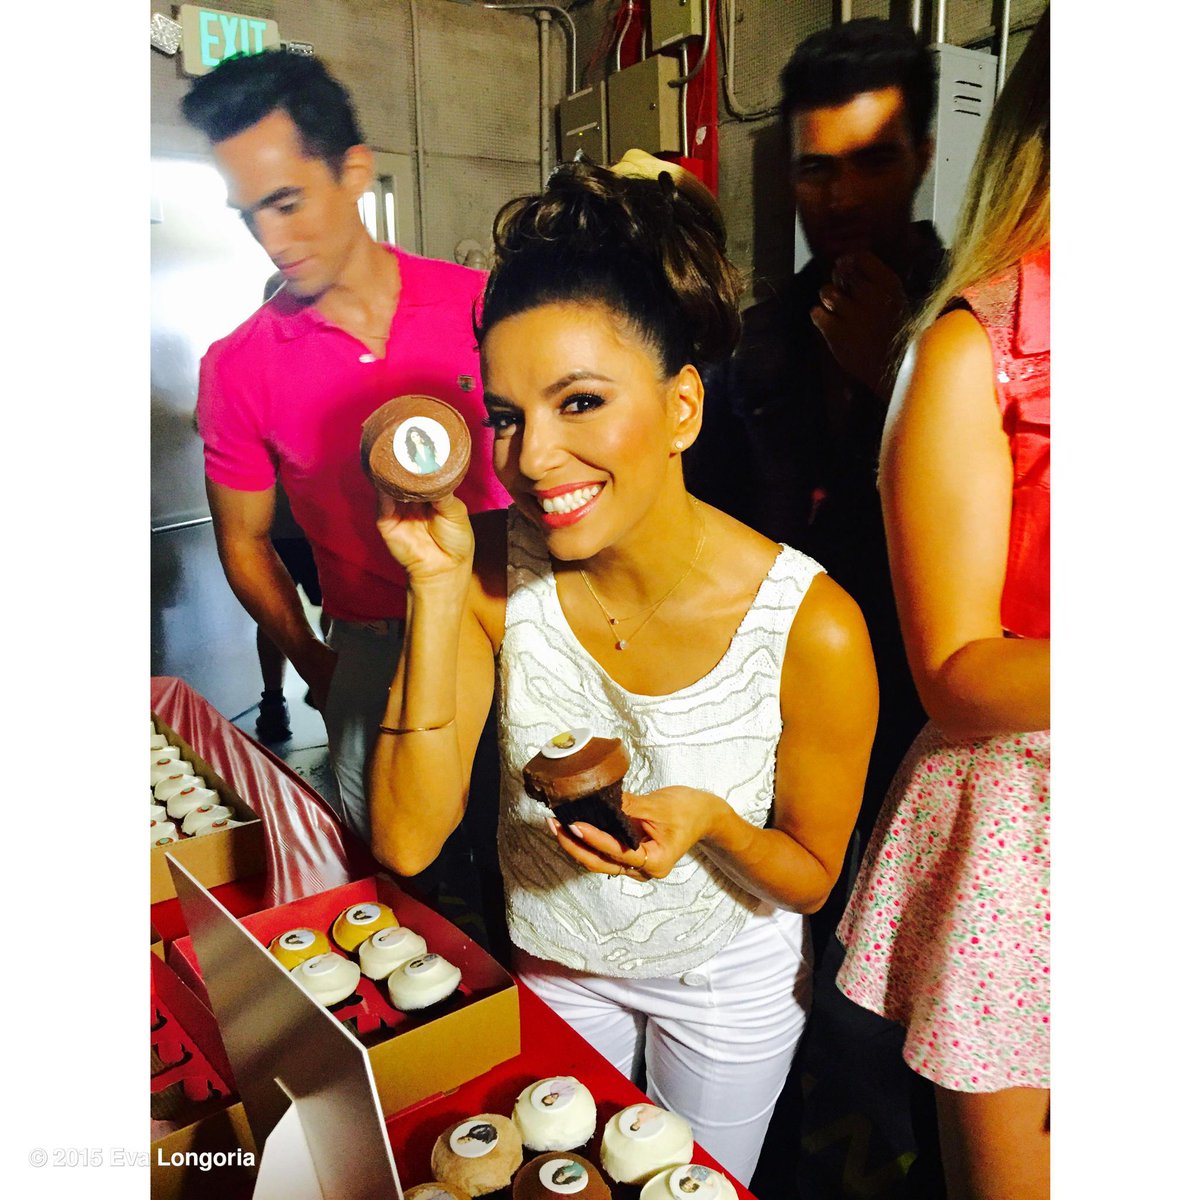 Thanks for making our first day on set so sweet @Sprinkles! #HotandBothered http://t.co/0kOdldTCou